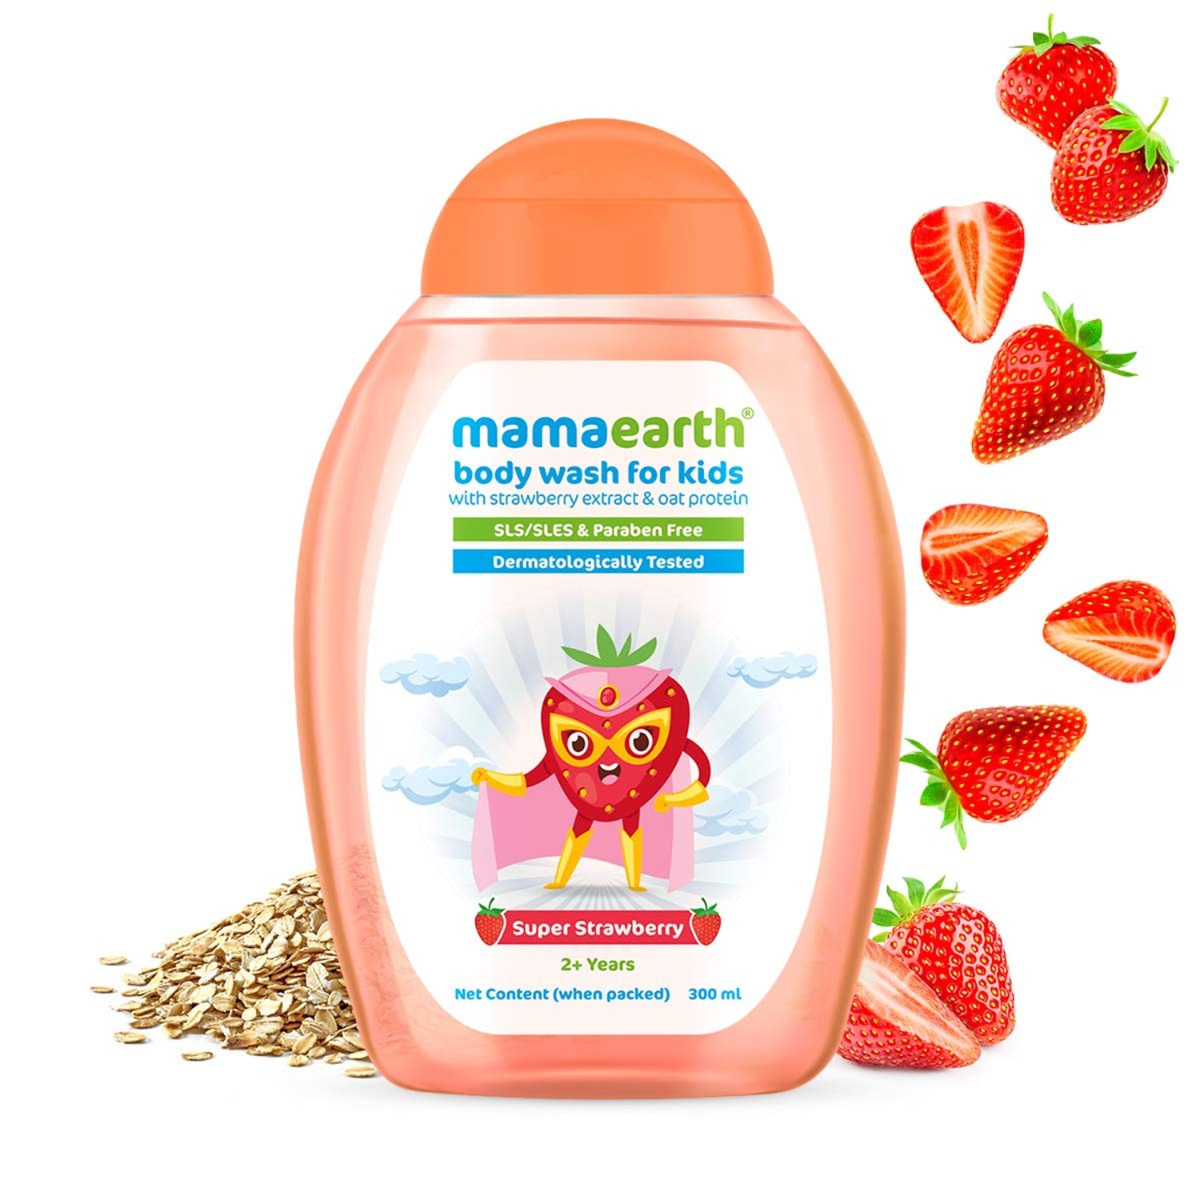 MamaEarth Body Wash for Kids with Strawberry Extract & Oat Protein, 300ml